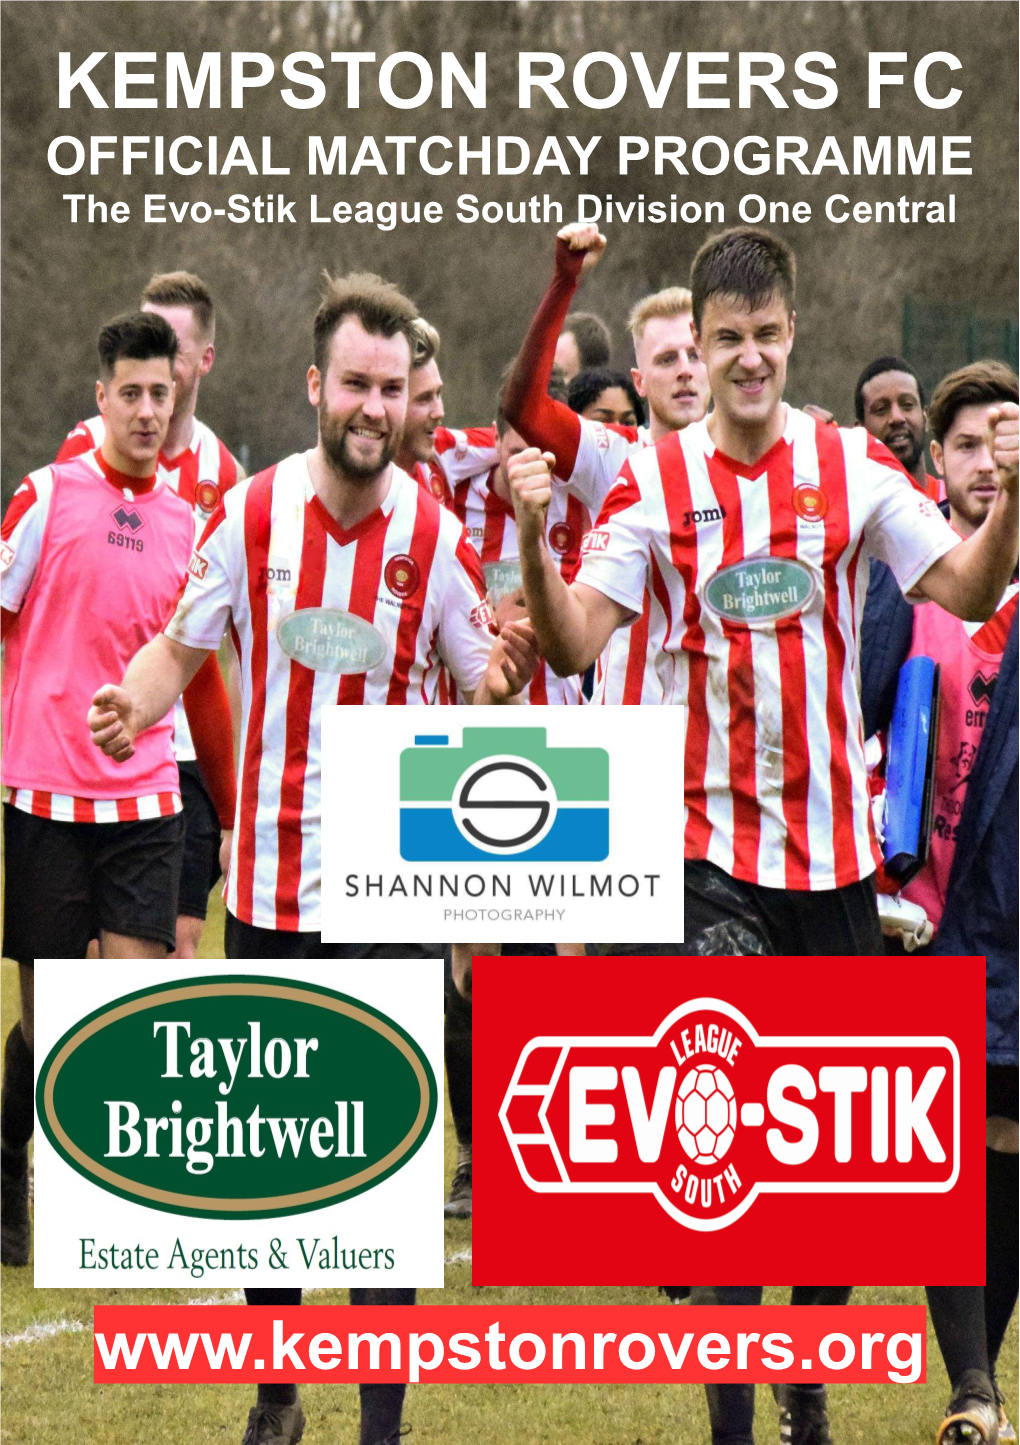 KEMPSTON ROVERS FC OFFICIAL MATCHDAY PROGRAMME the Evo-Stik League South Division One Central